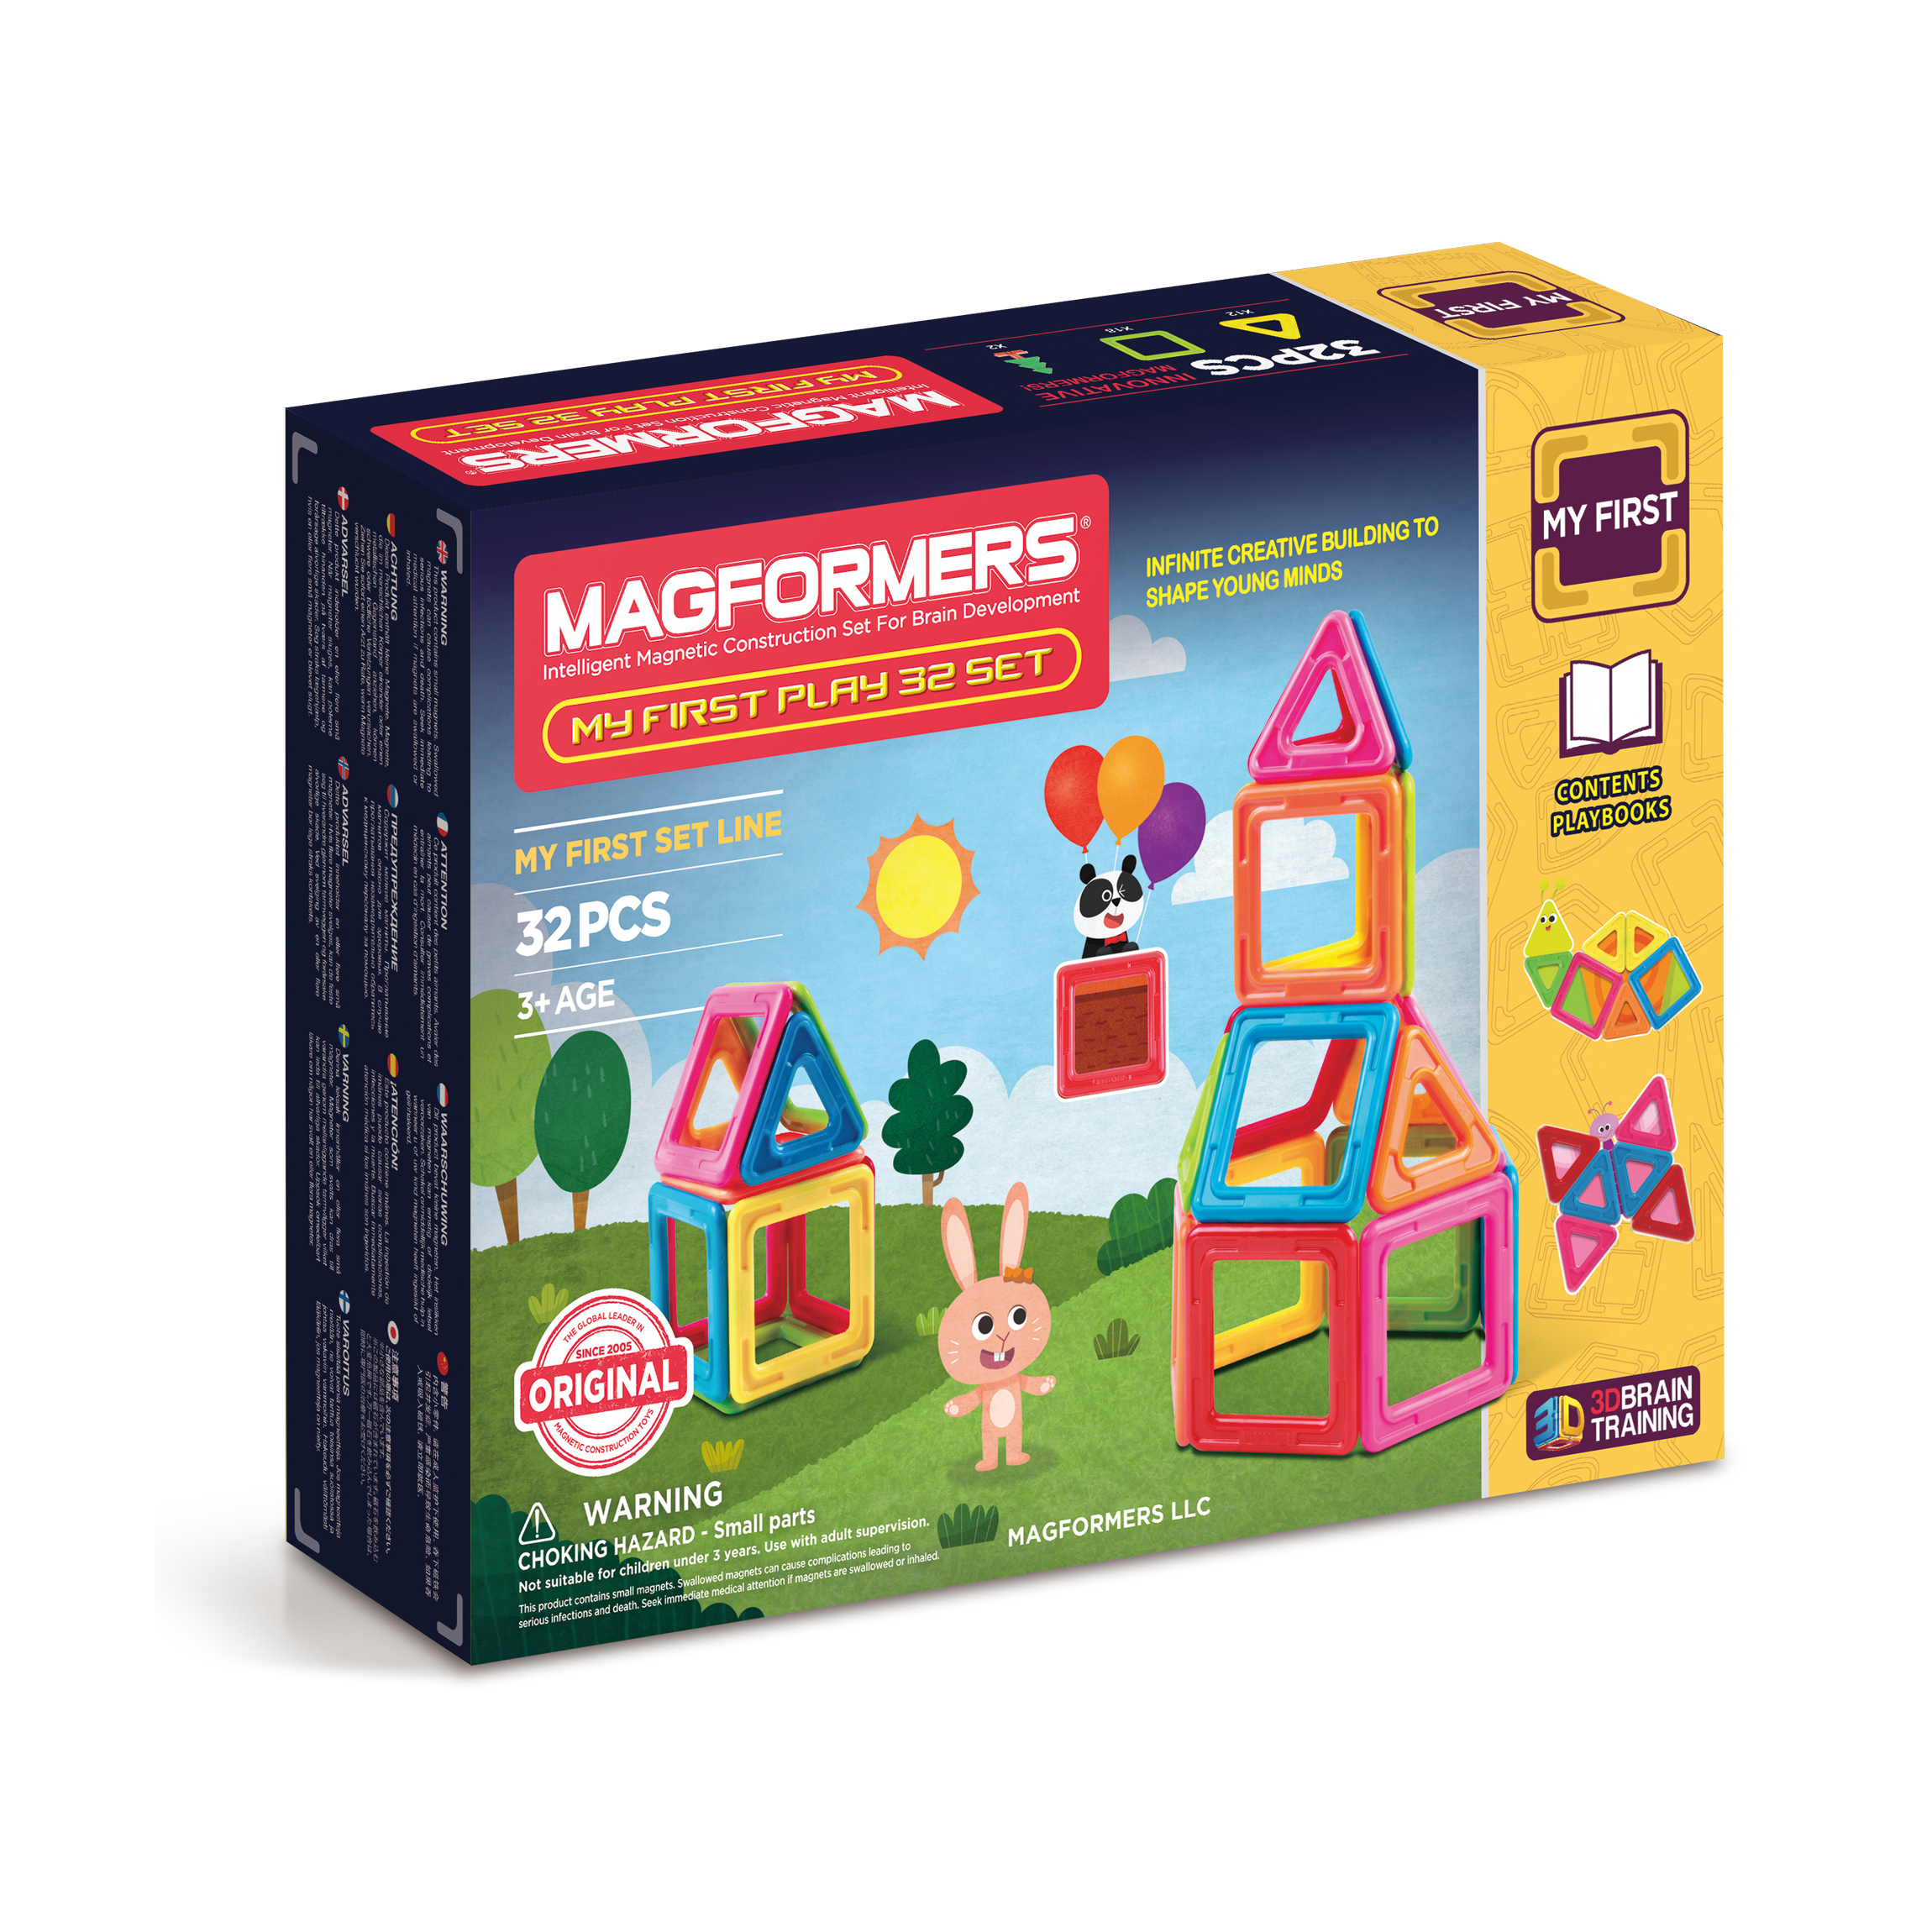 Magformers  My First Play Set: 32 Pcs